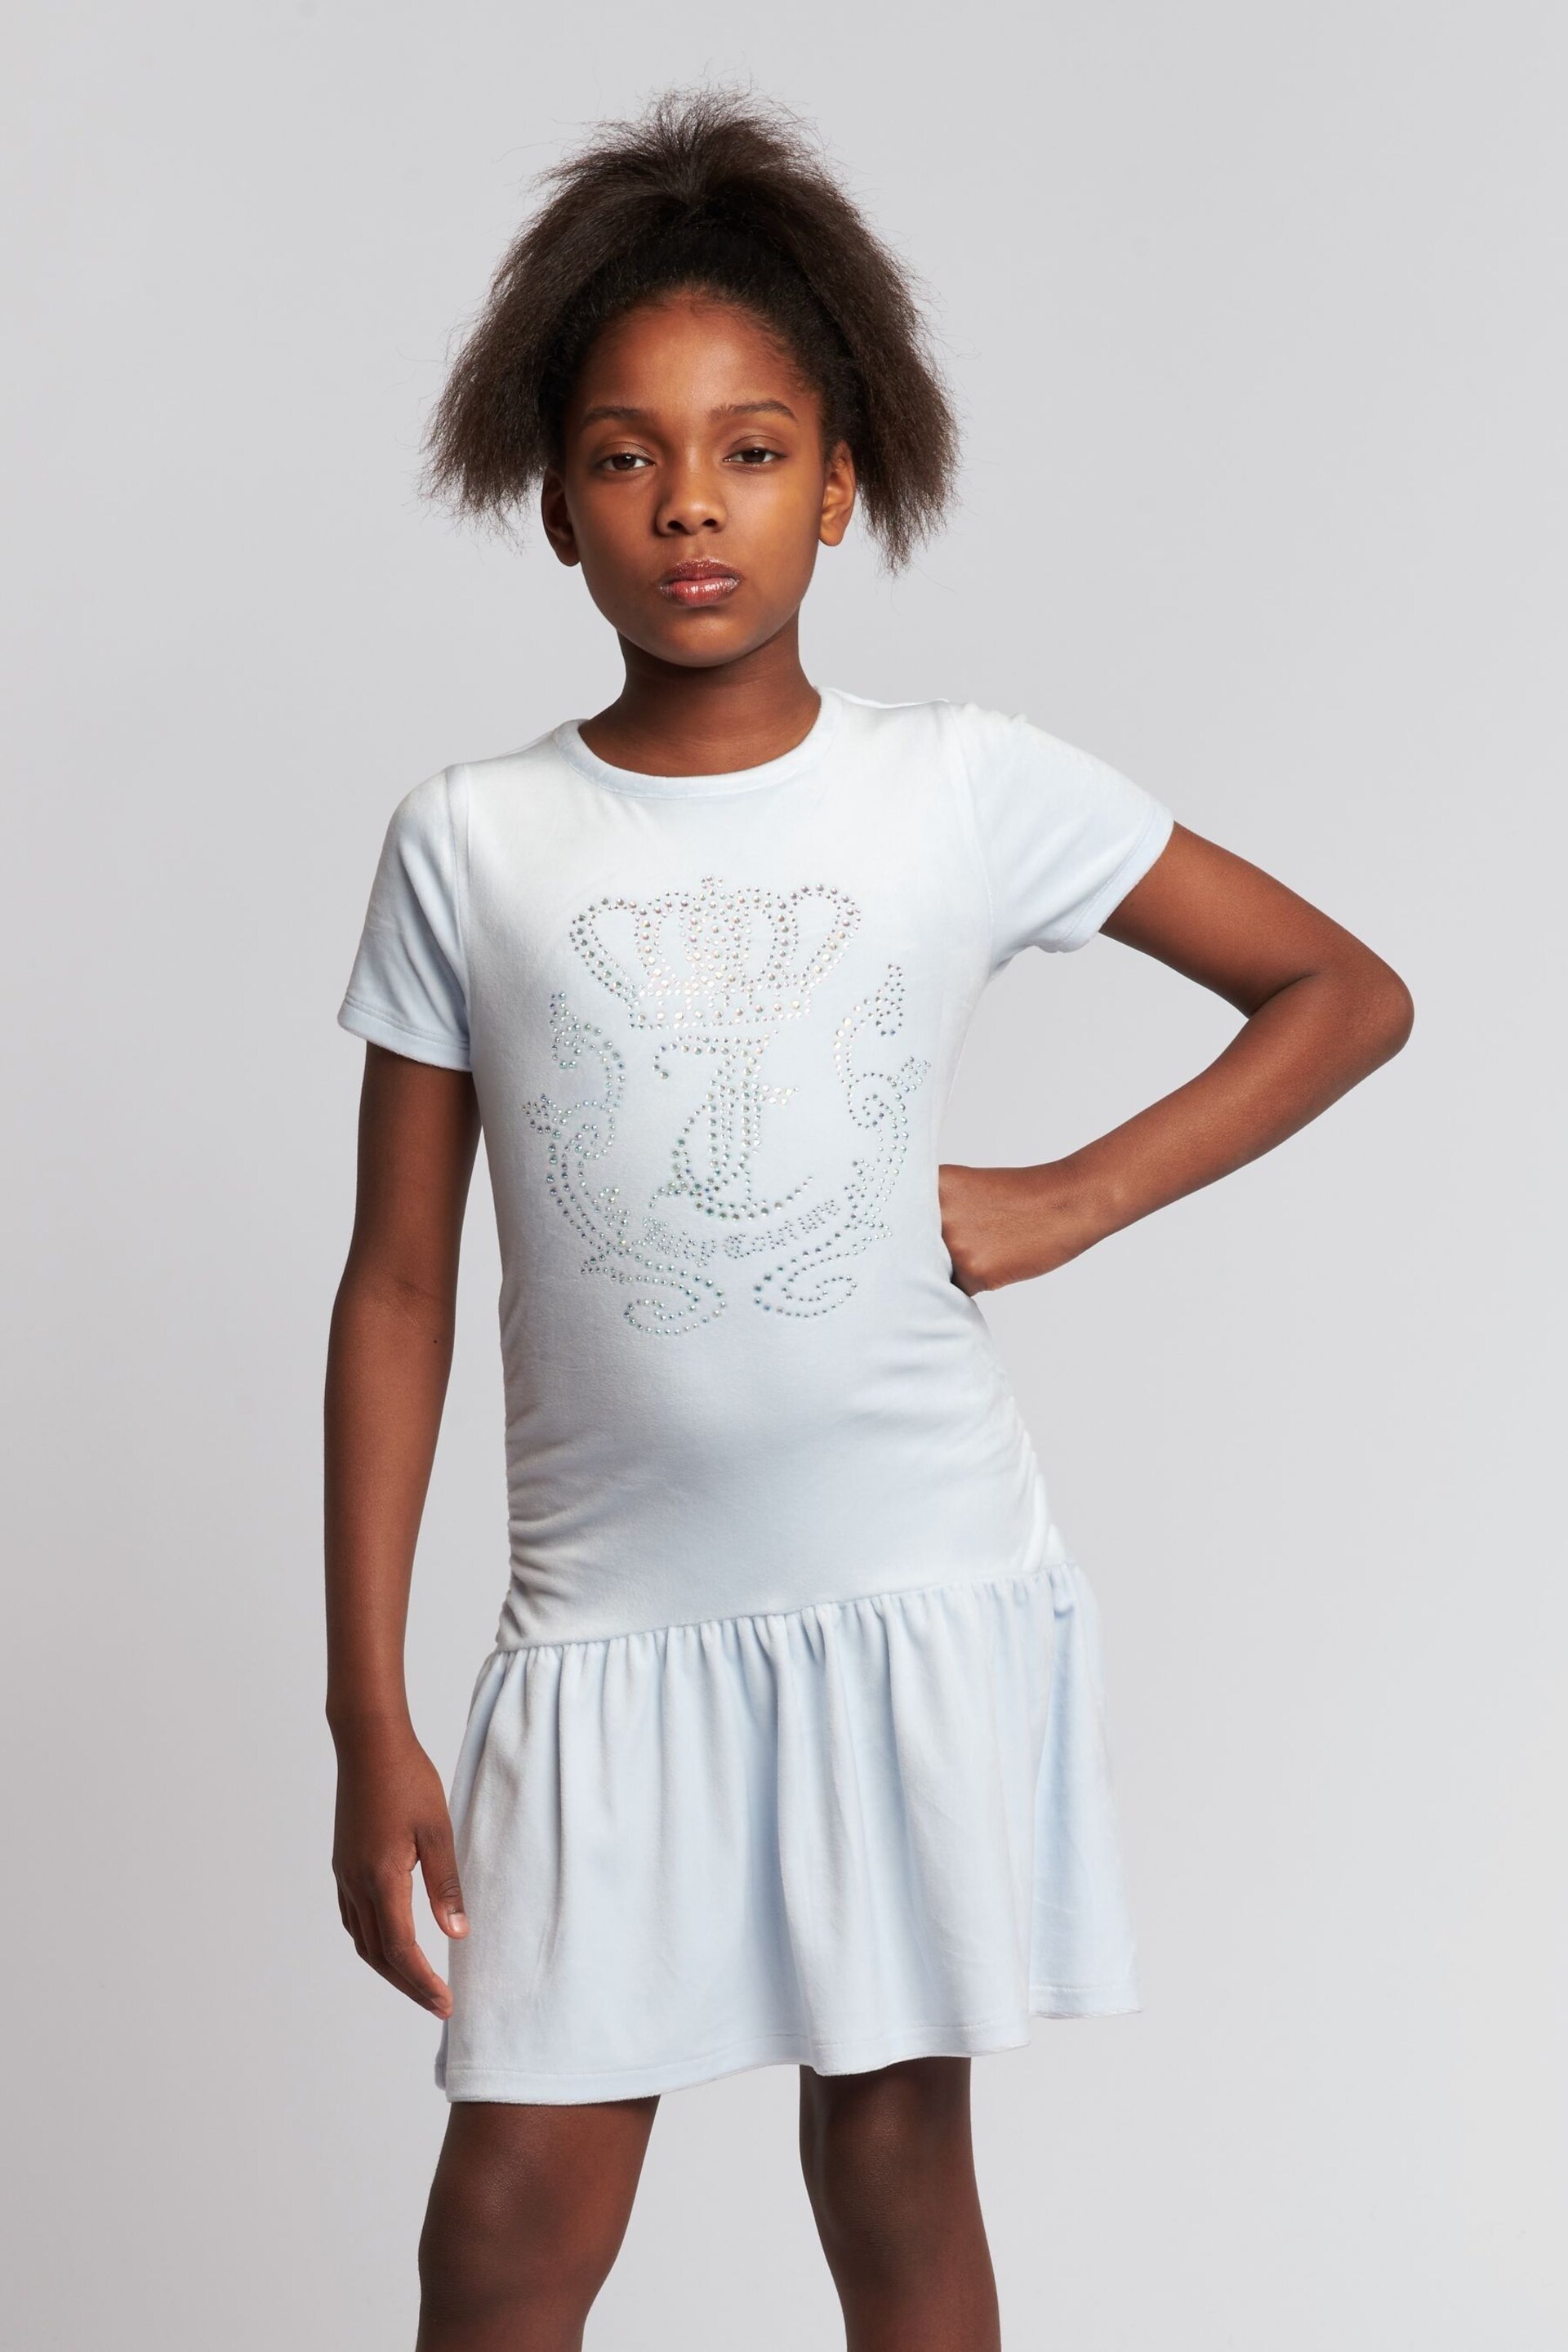 Juicy Couture Girls Blue Diamante Crown Dress - Image 1 of 7